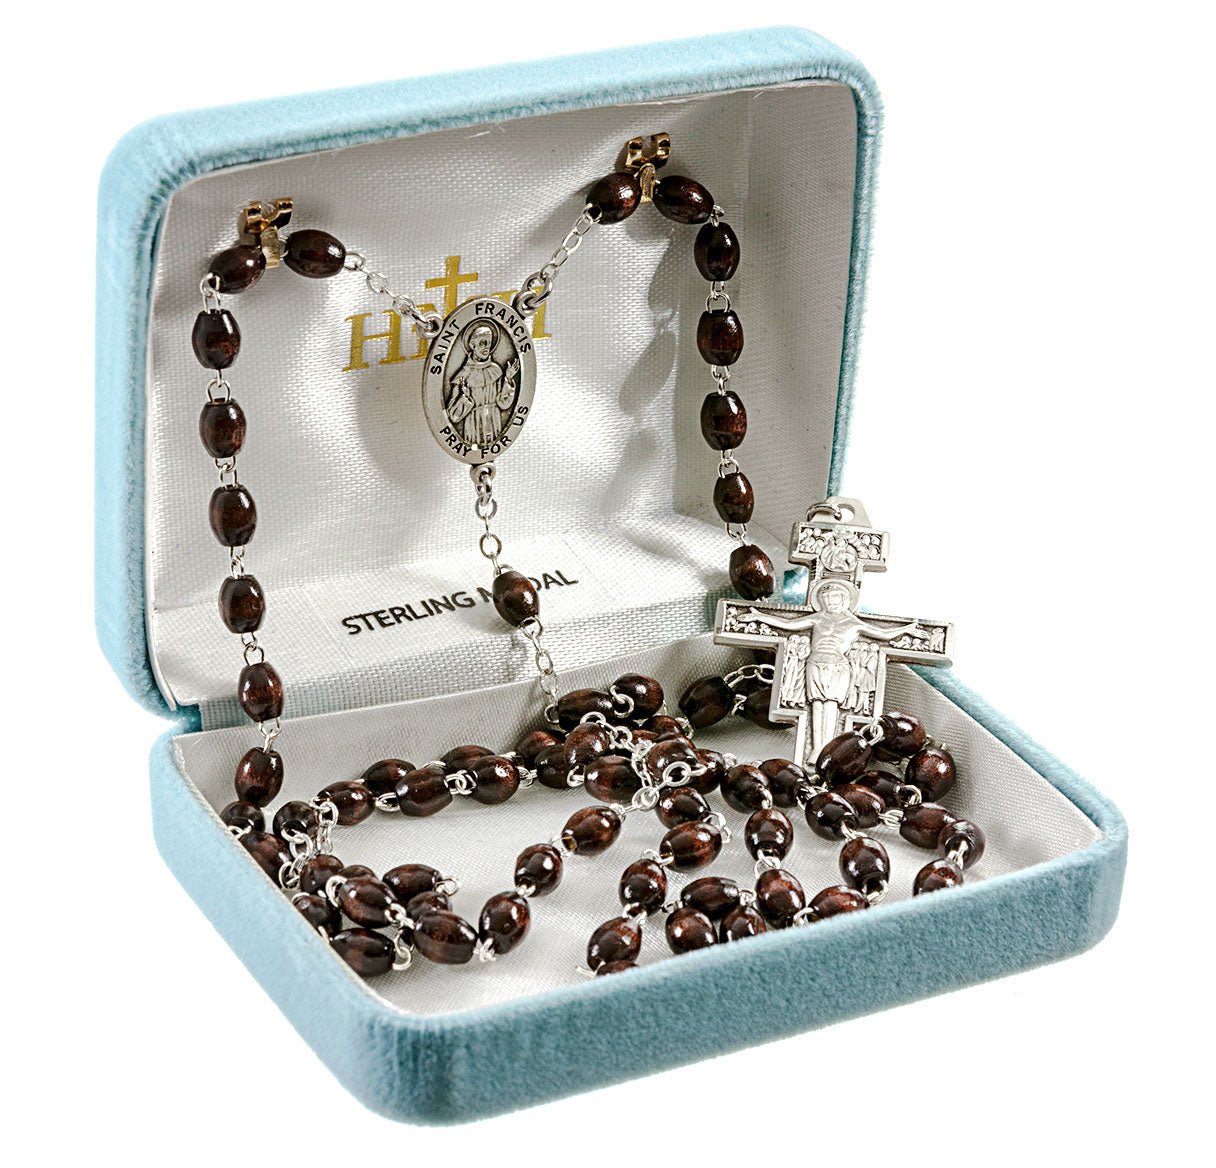 Saint Francis 7 Decade "Franciscan Crown" Rosary Sterling Crucifix and Centerpiece